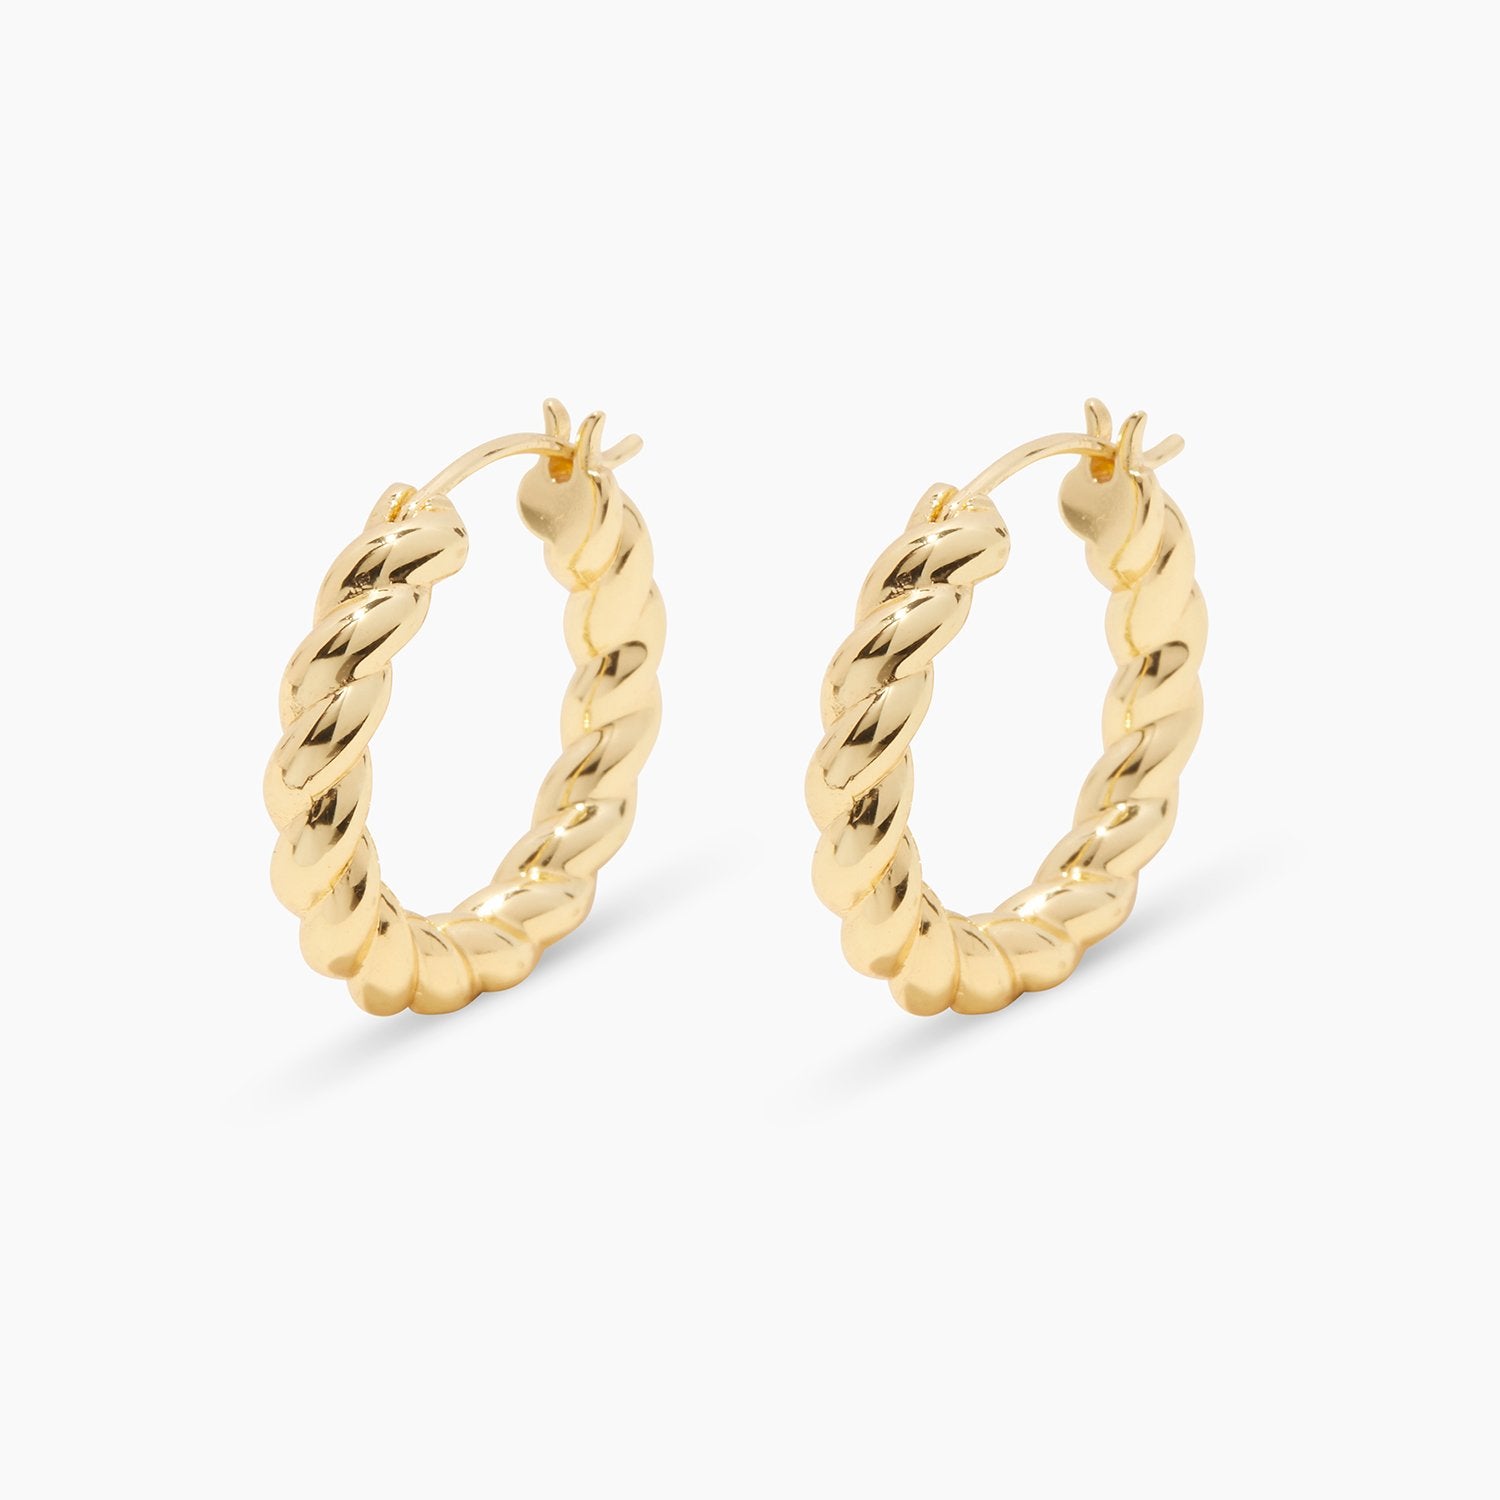 These classic Gorjana Crew Hoops are the ultimate addition to any wardrobe. Crafted with exquisite 18 k gold plated brass twisted rope design, these timeless earrings will lend an air of refined elegance to your daily look. Expertly crafted by the renowned California Designer Gorjana, these hoops provide the perfect accessory for any style.